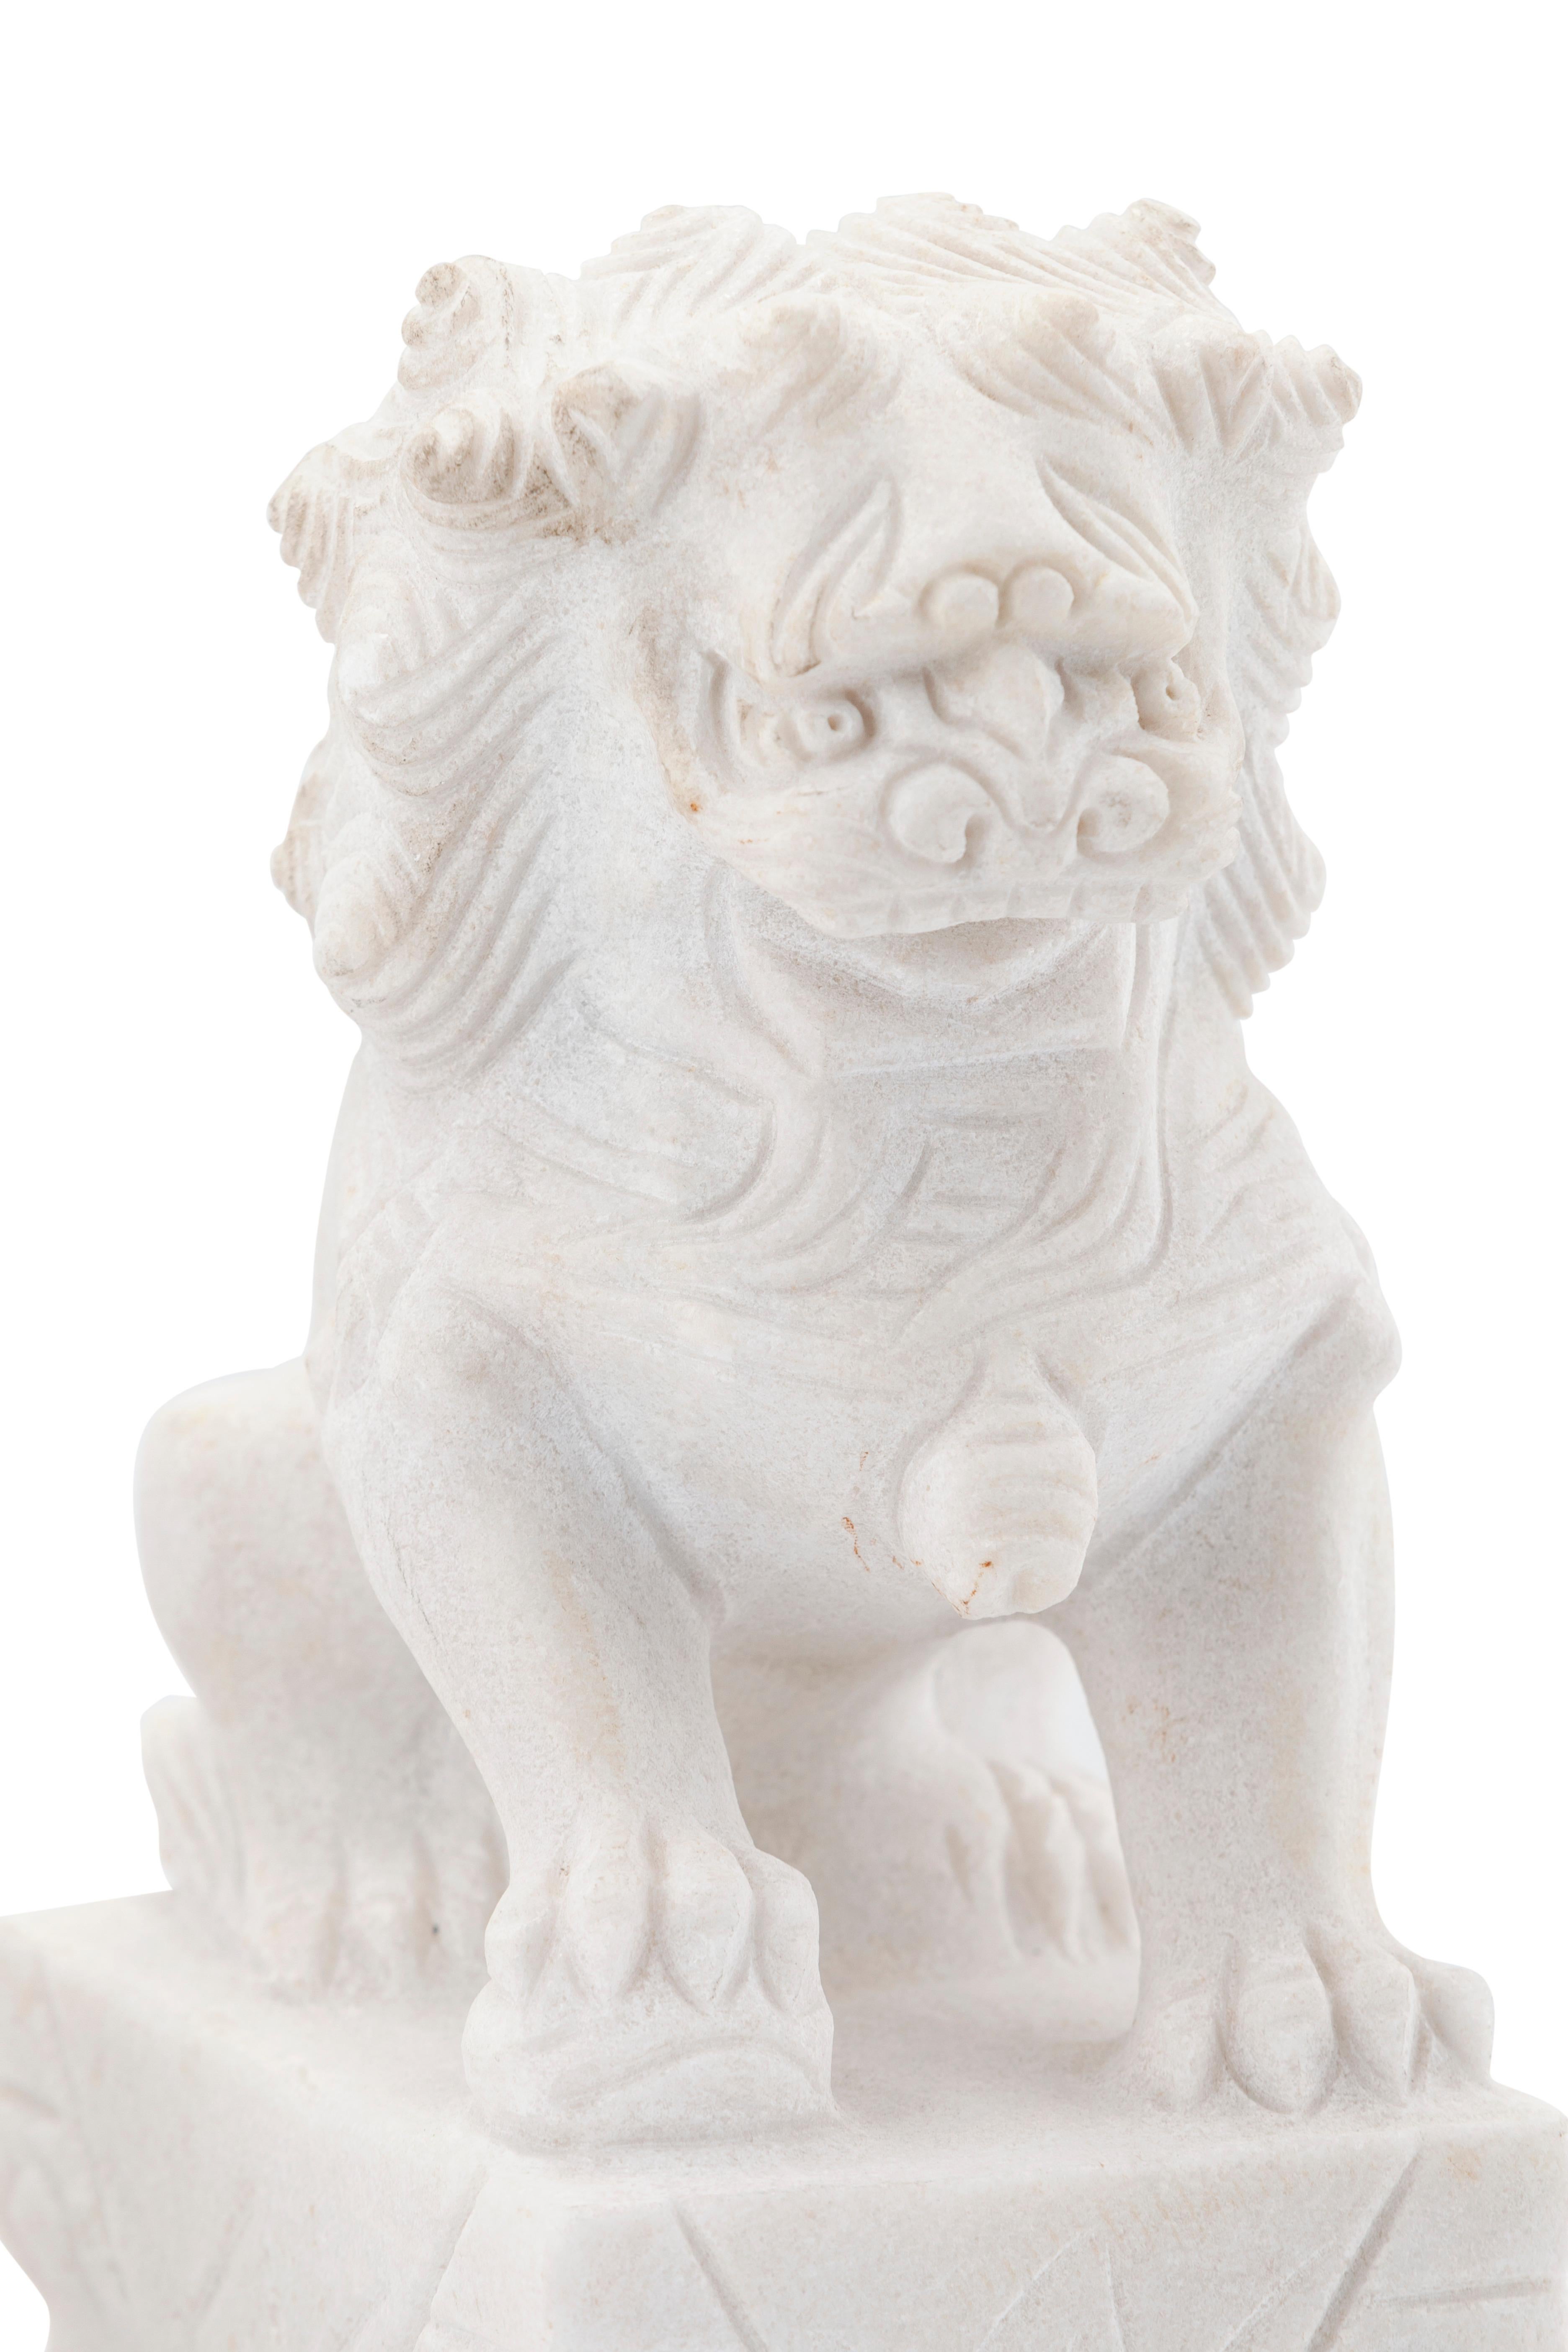 Hand-Carved Set/2 Lions, Calacatta Bianco Marble, Handmade by Lusitanus Home For Sale